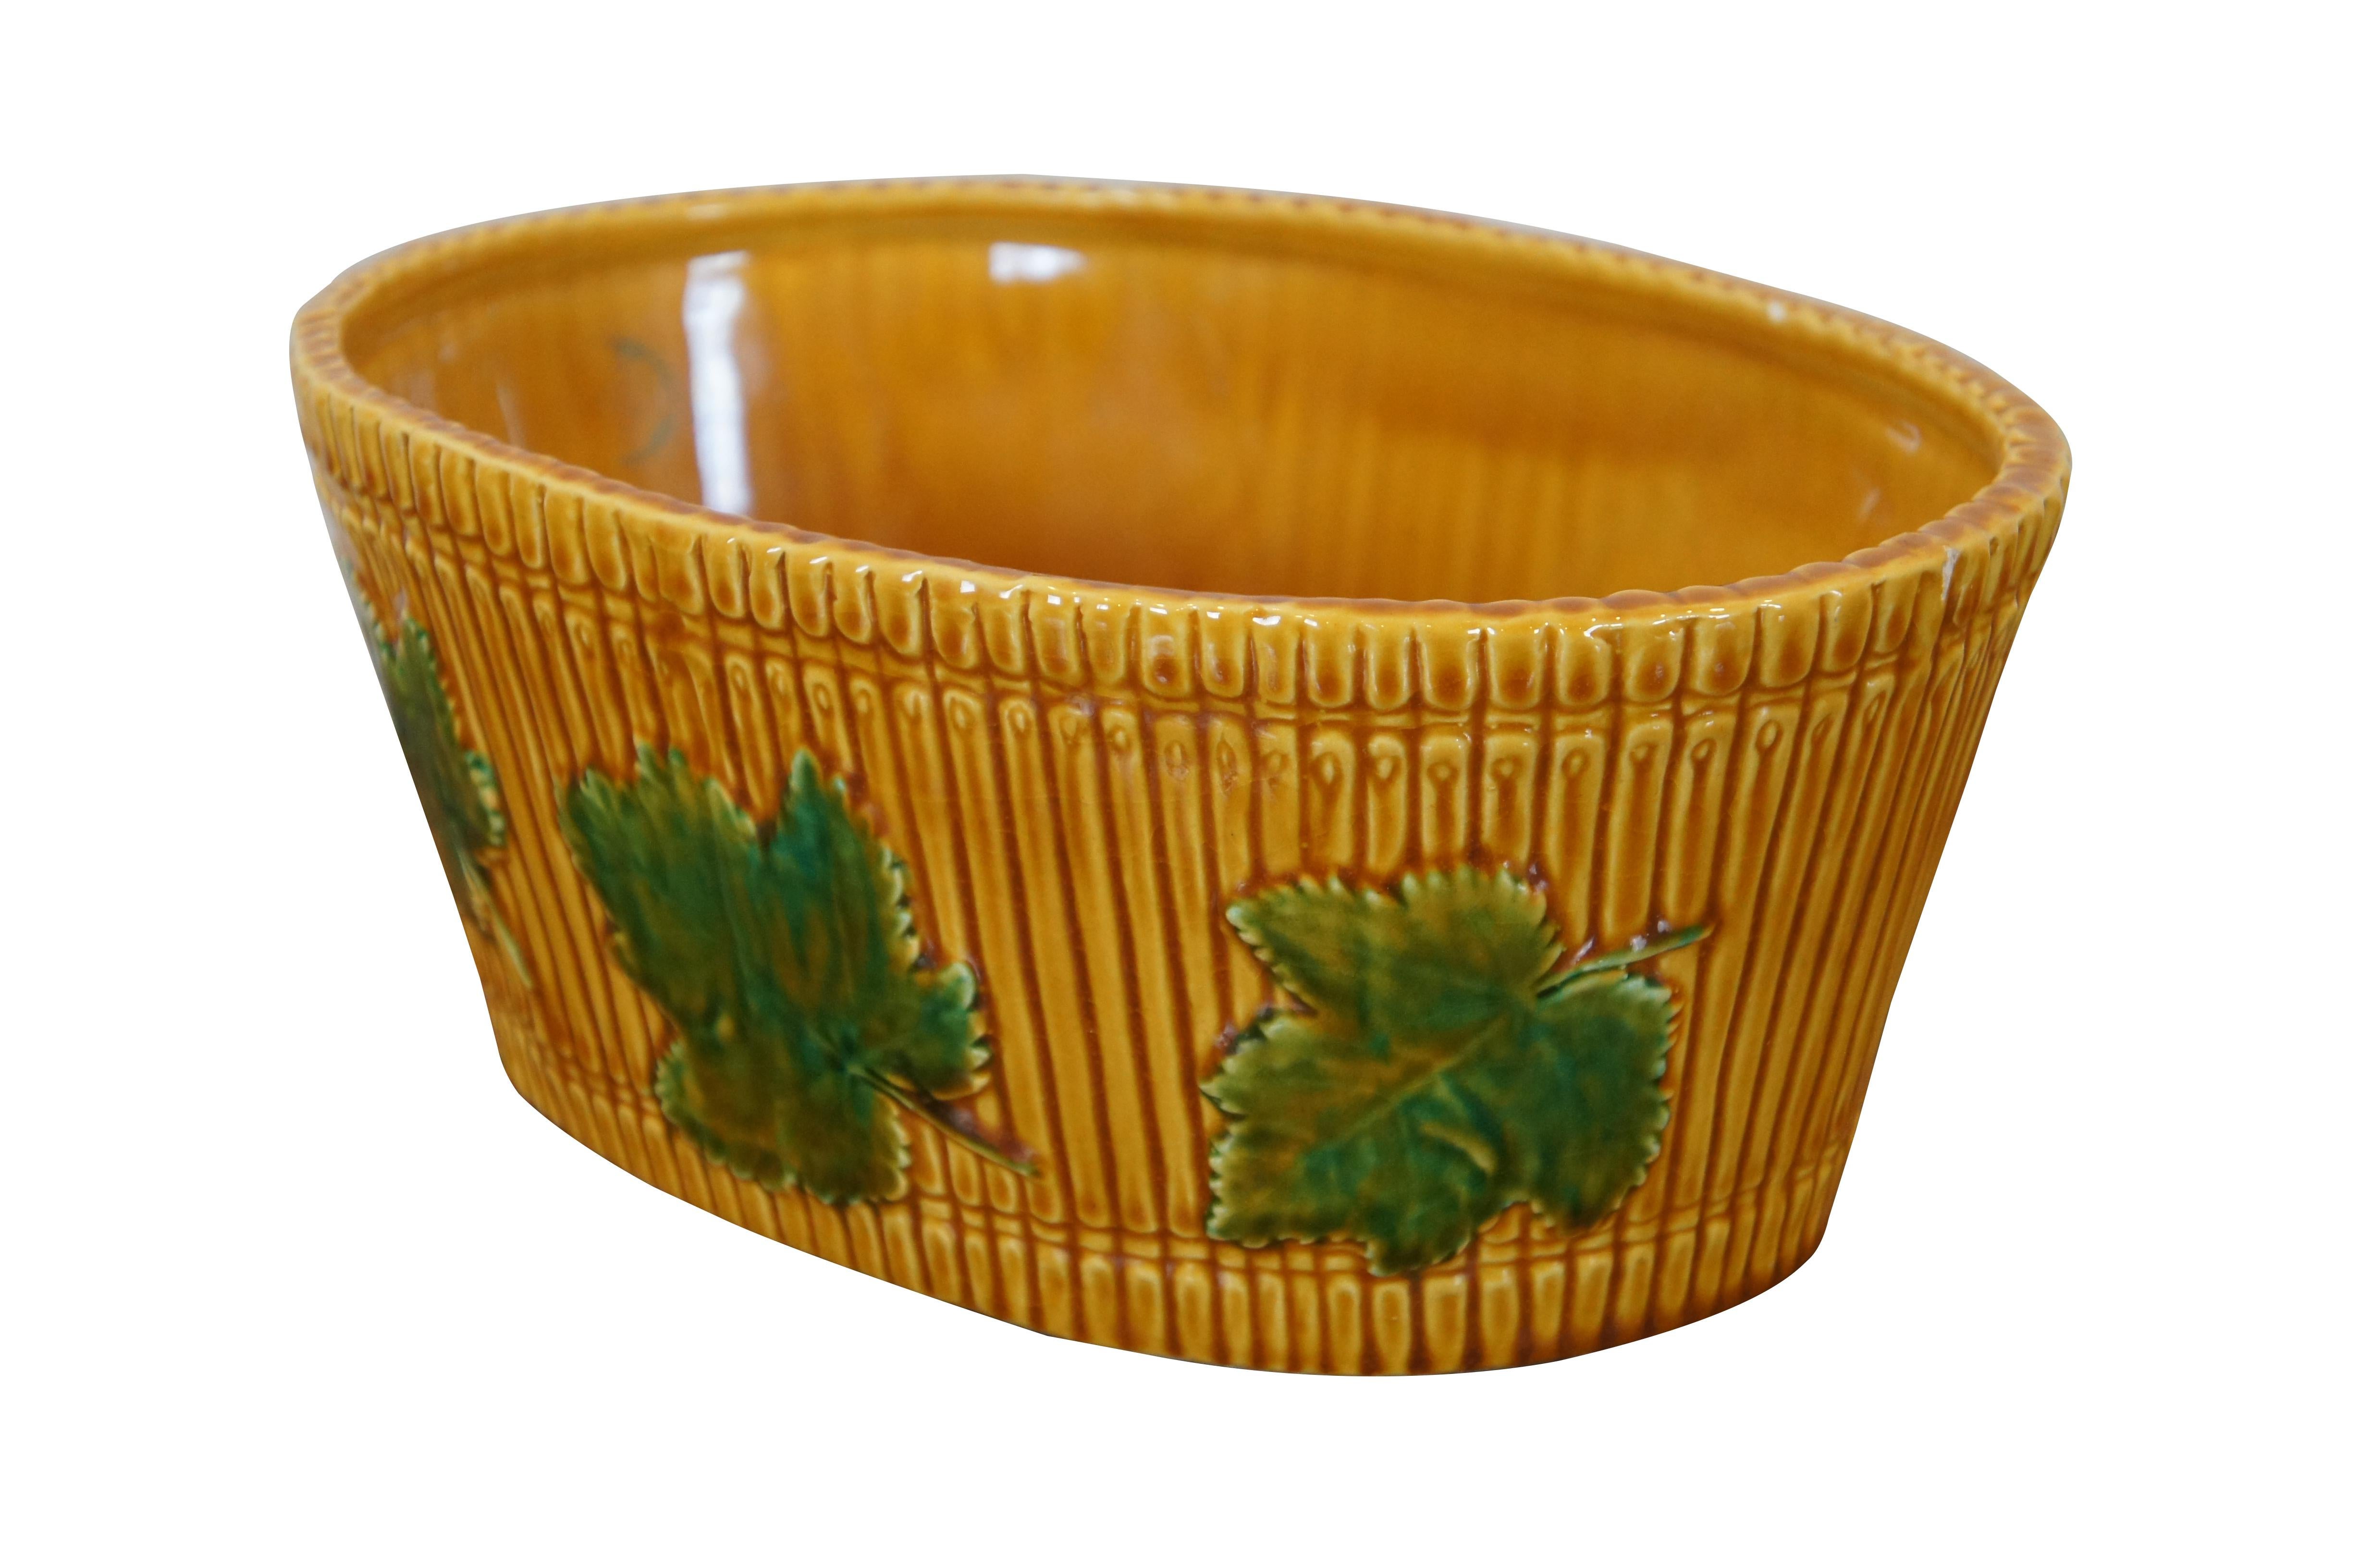 Large vintage Italian art pottery / majolica planter. Oval shape with tapered base; glazed in yellow and brown to resemble a bushel basket, accented with several green grape leaves. Marked S.5941 Italy on base.

Dimensions:
11” x 7.5” x 4.5” (Width